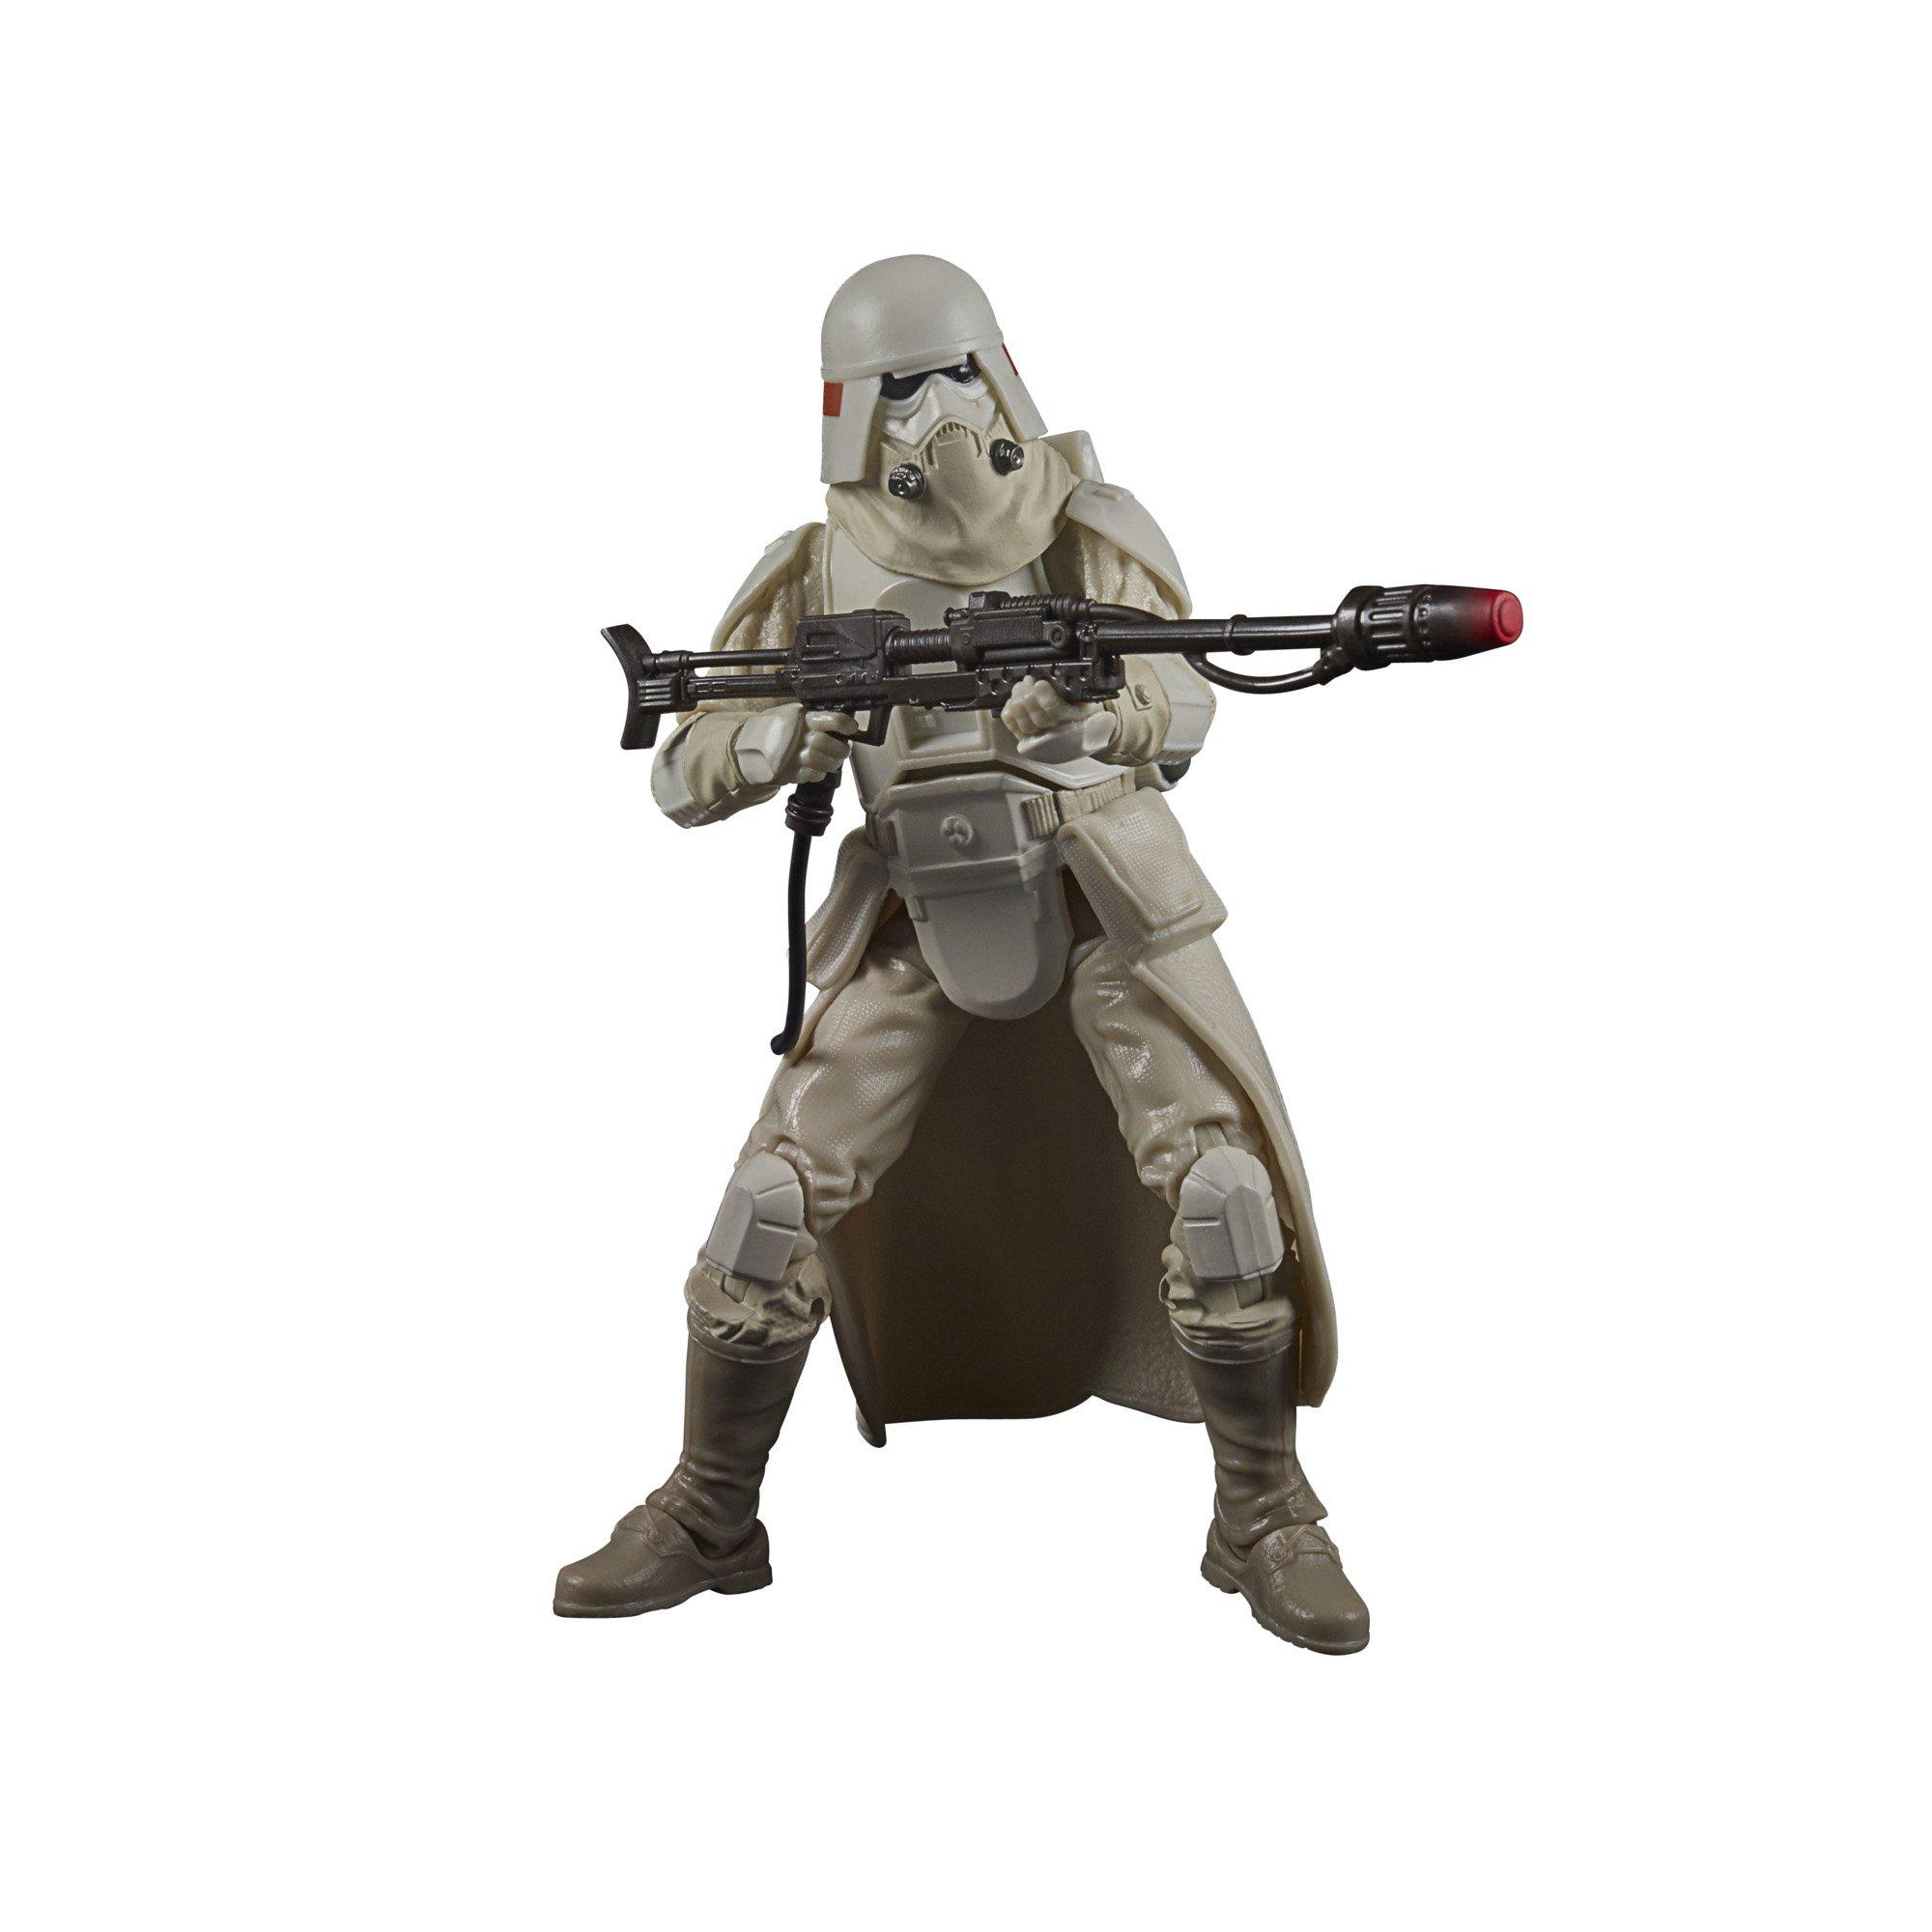 Hasbro Star Wars The Black Series 6-Inch First Order Stormtrooper for sale online